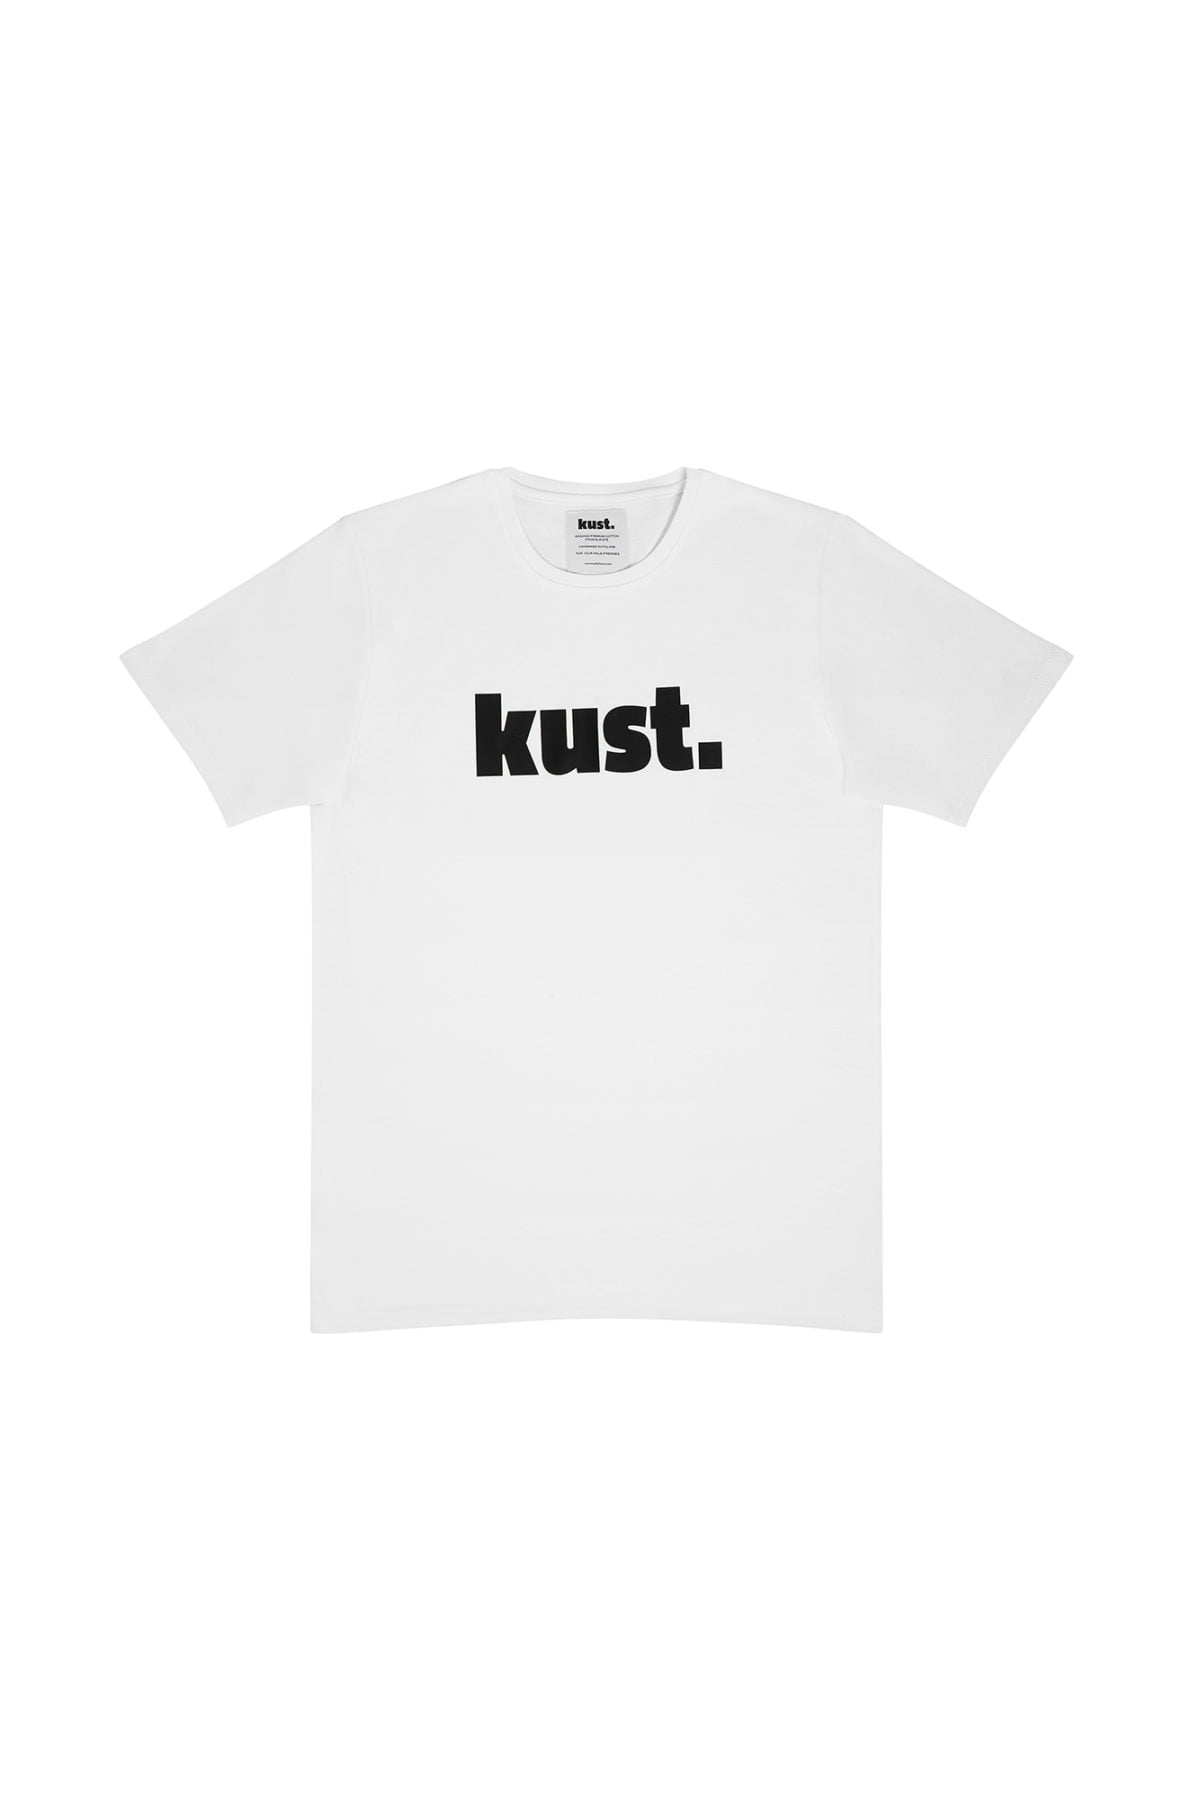 Organic cotton mens tshirt, minimalistic and timeless design, tailored with soft organic cotton.Classic round neckline. kust. logo printed in black at front.